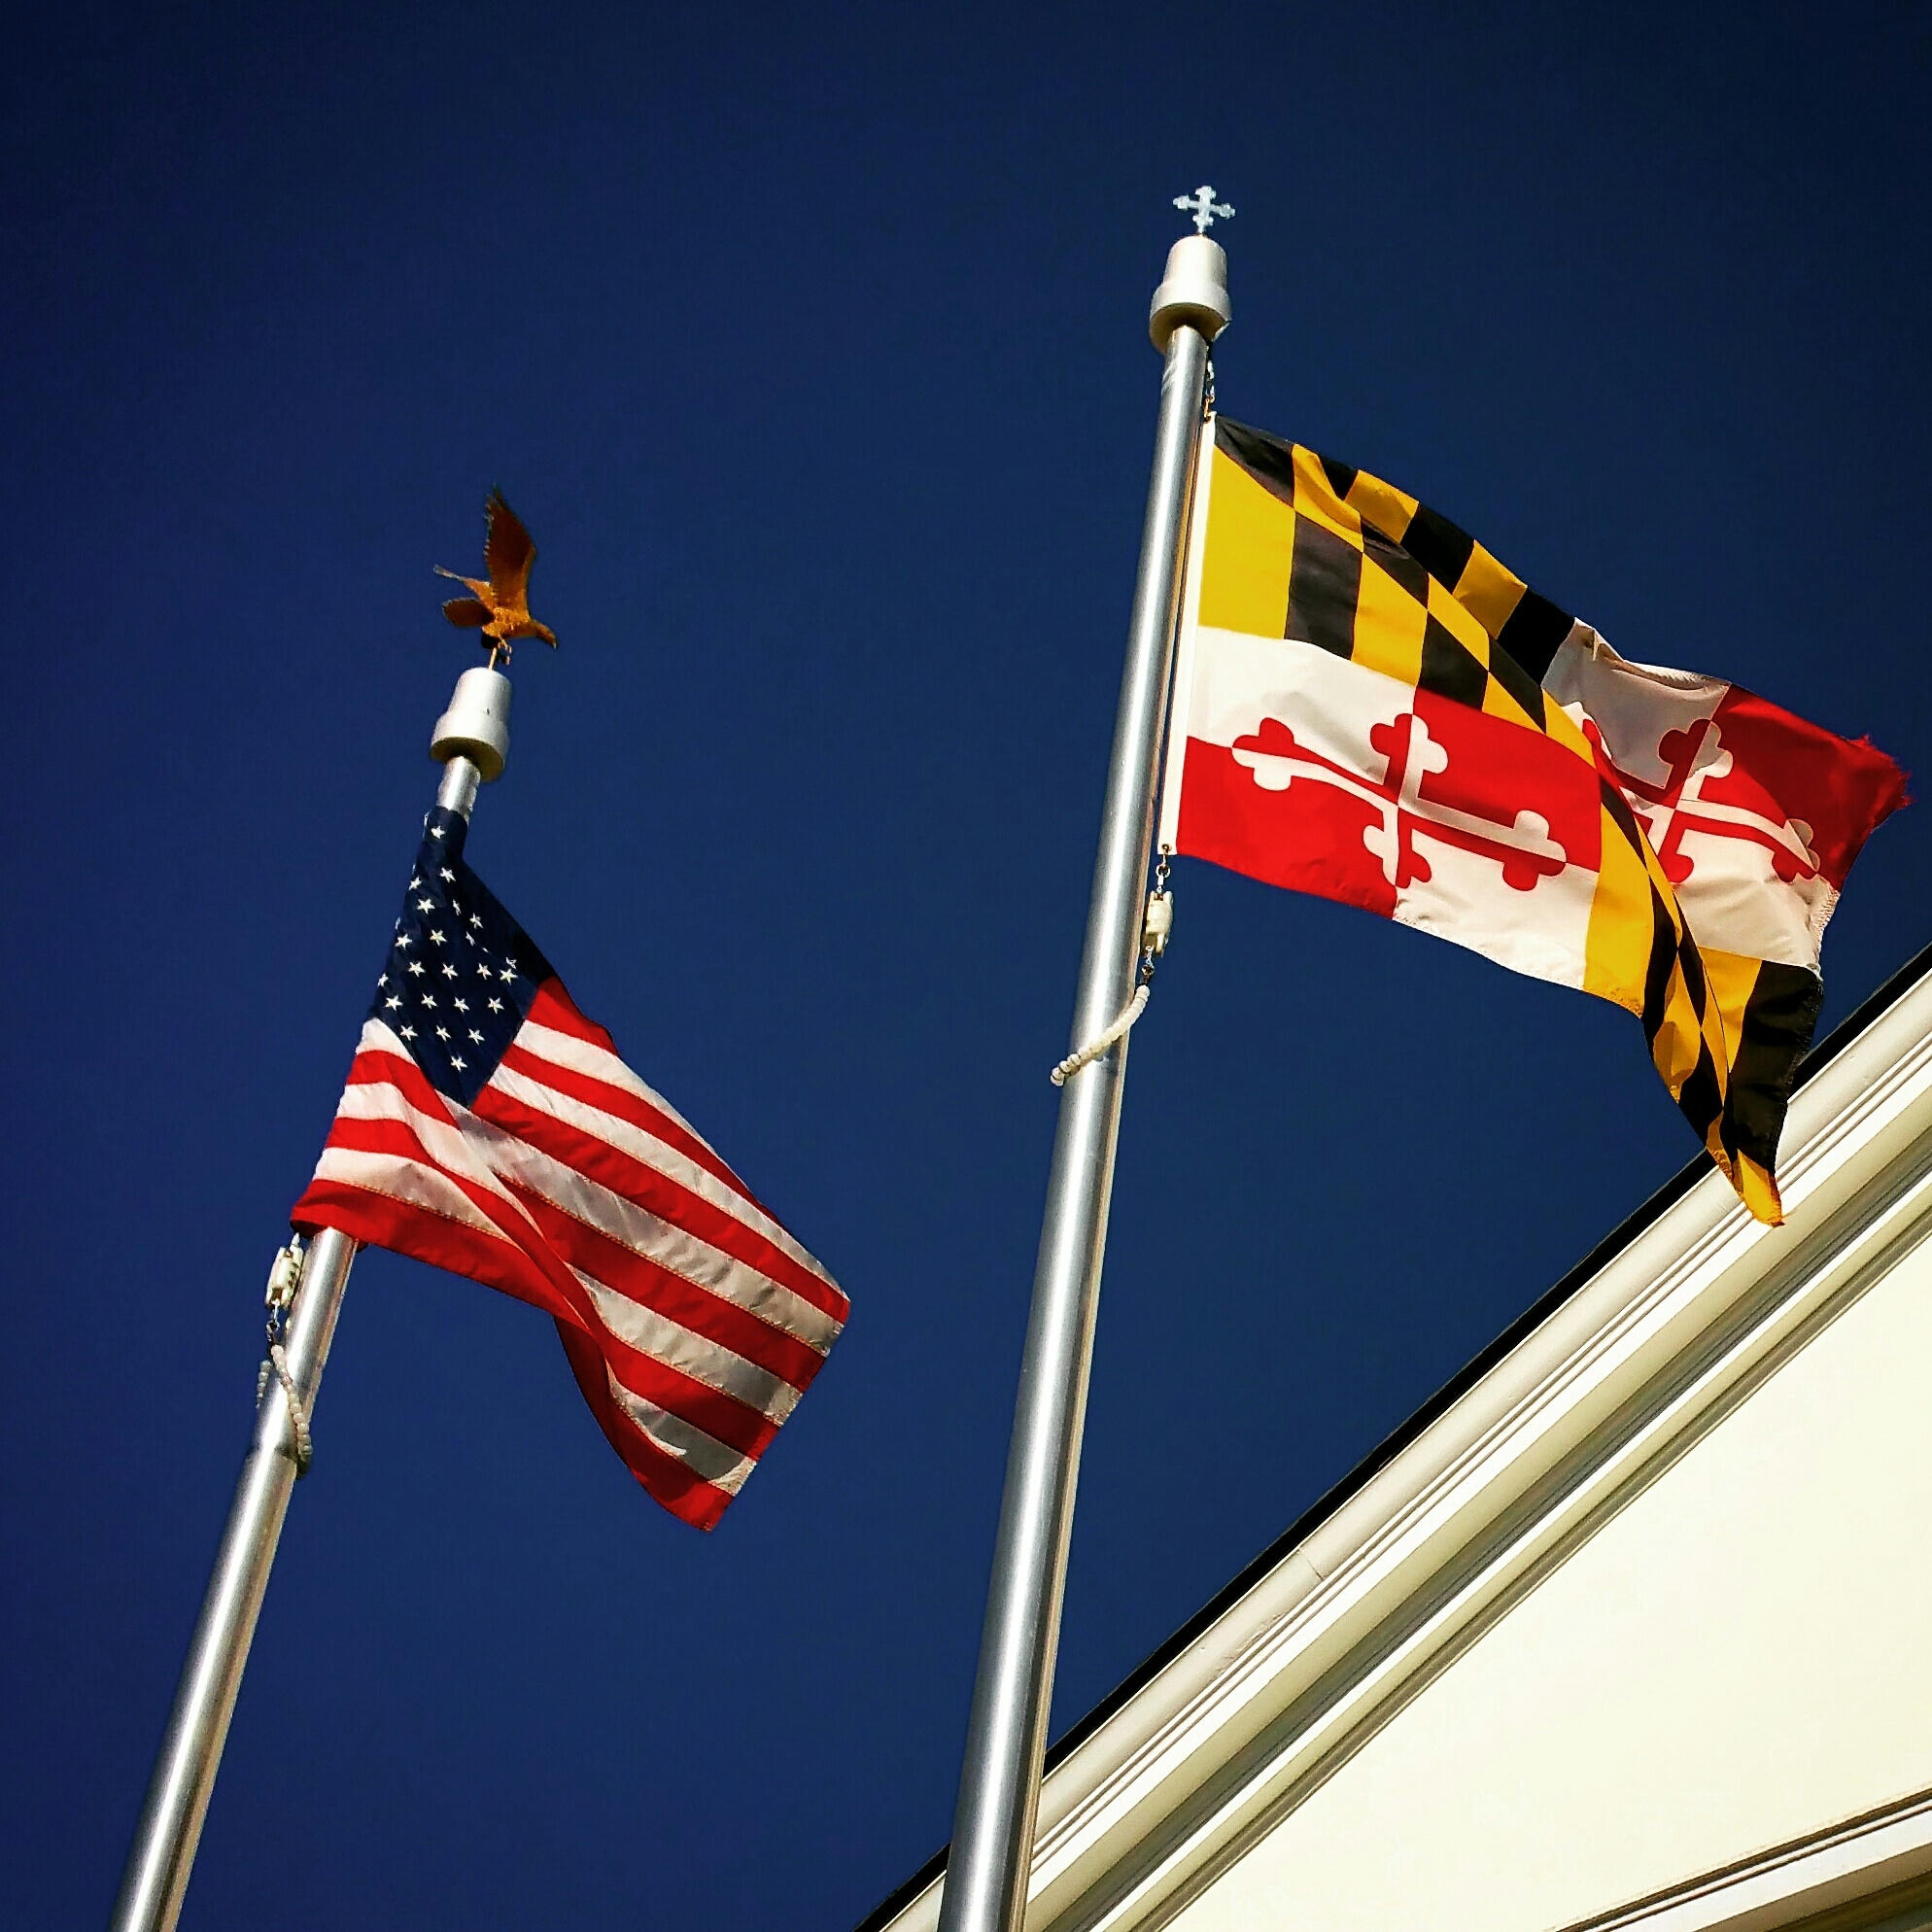 The Safest Cities In Maryland Are... - Thumbnail Image